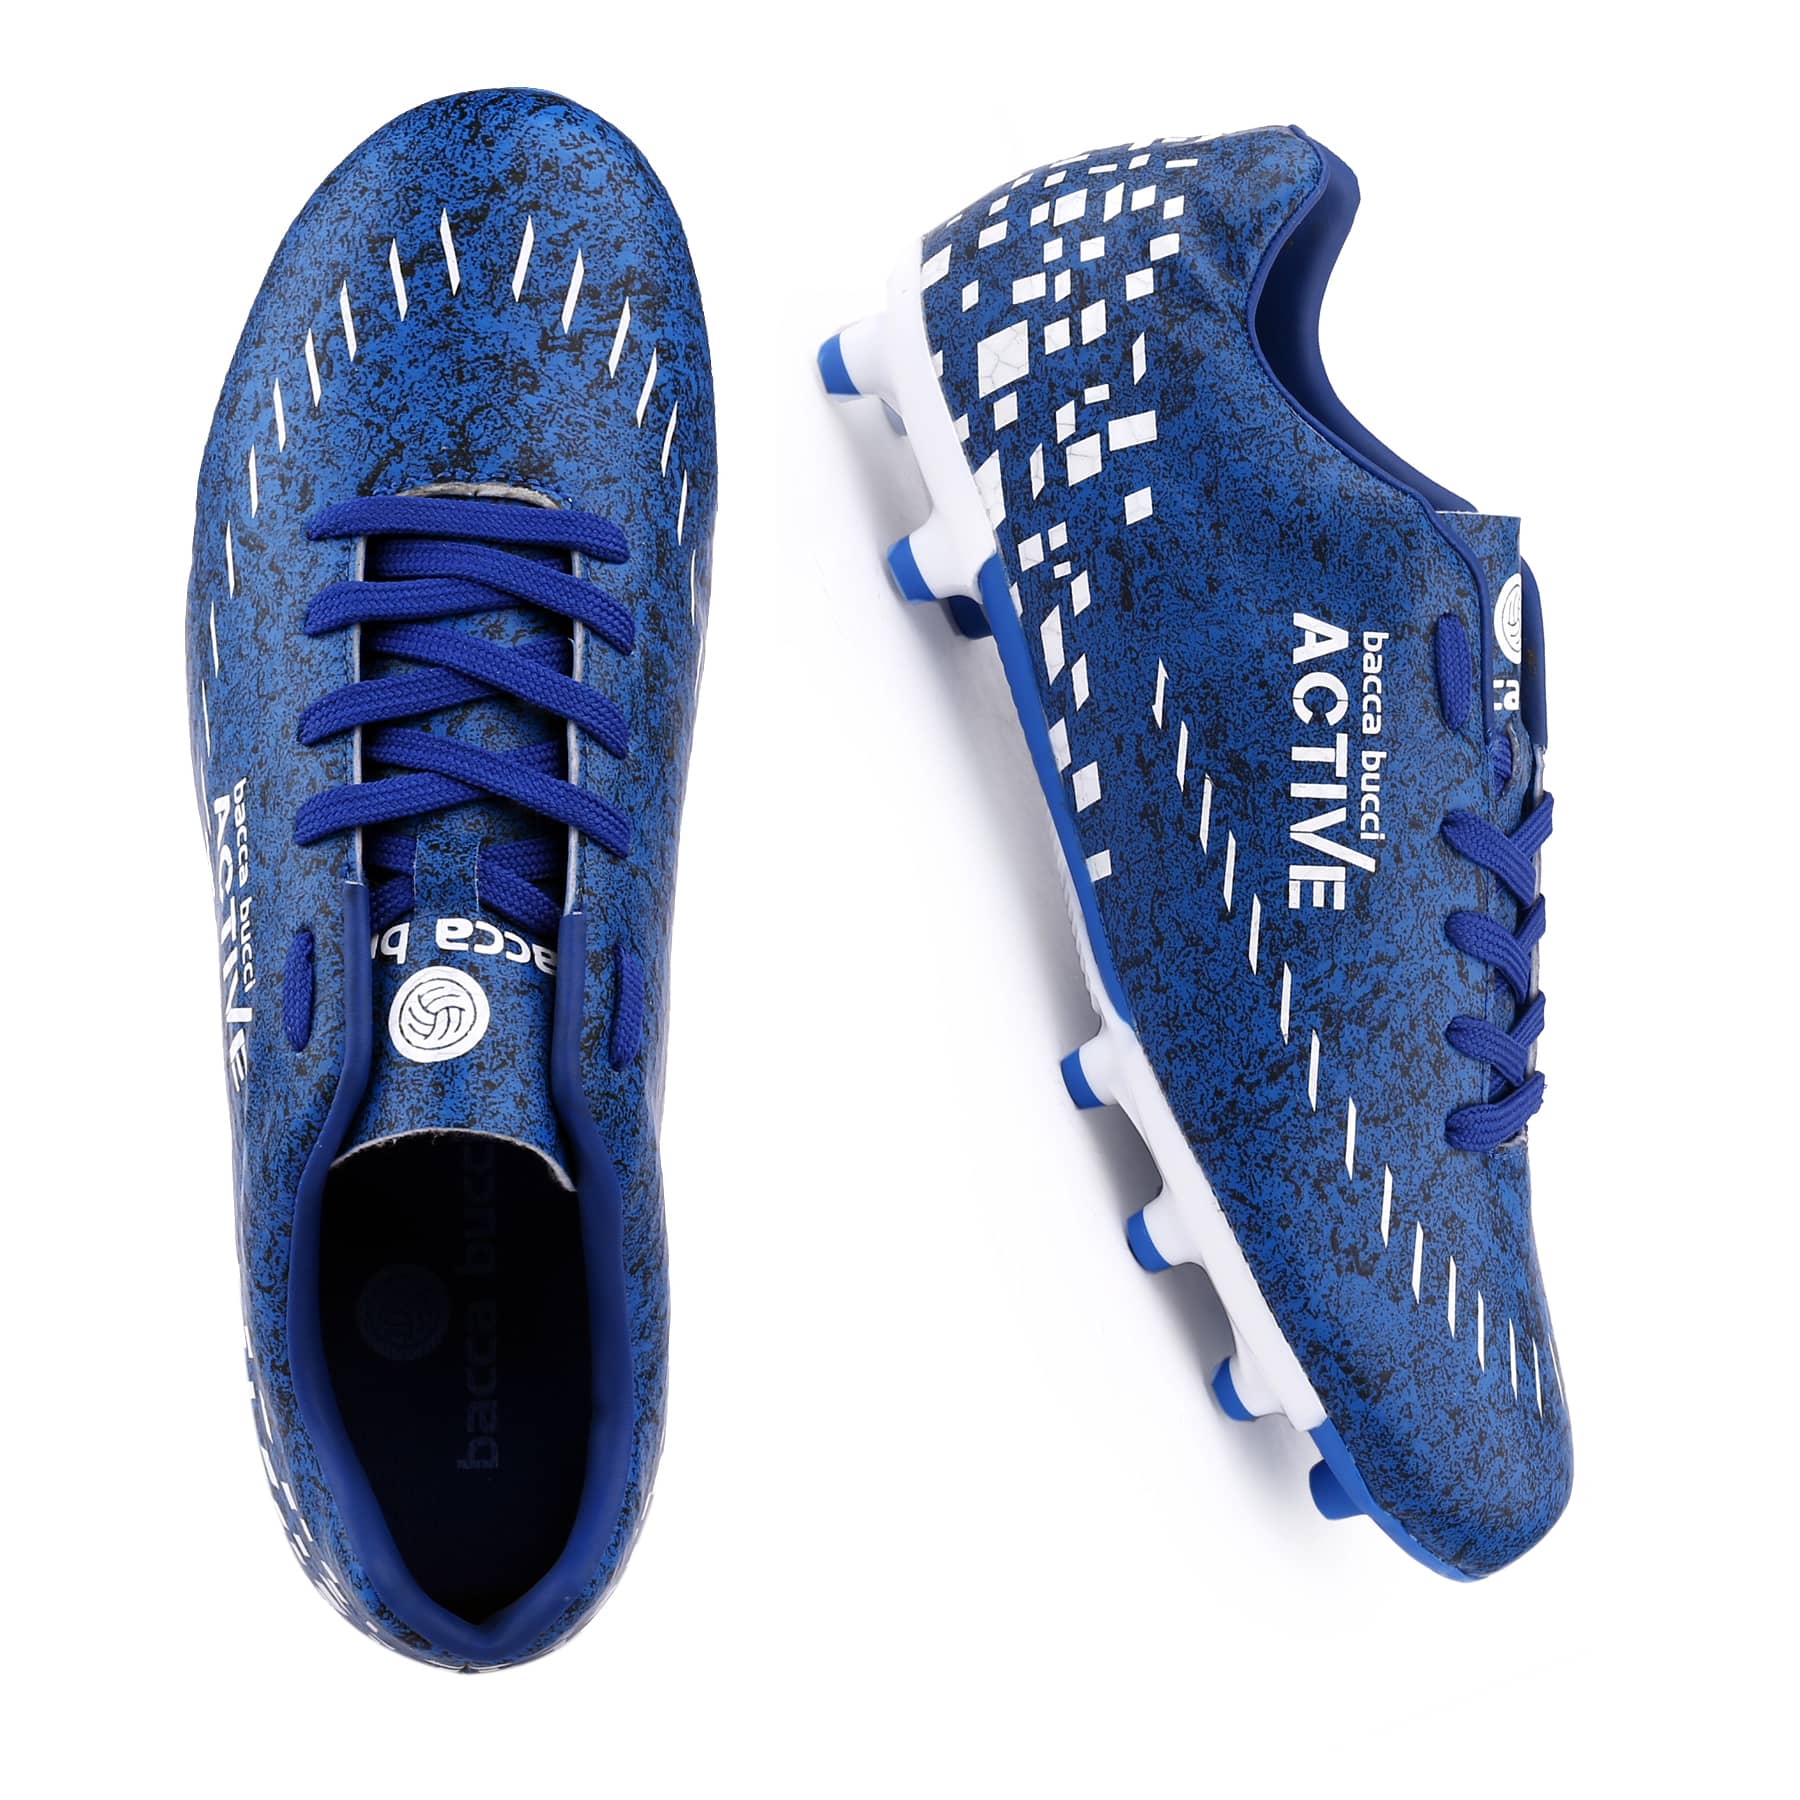 Bacca Bucci BluePulse Elite Series-Men's High-Performance Soccer Cleats with Enhanced Ball Control Texturing, Superior Traction Studs, and Dynamic Fit for Precision Play